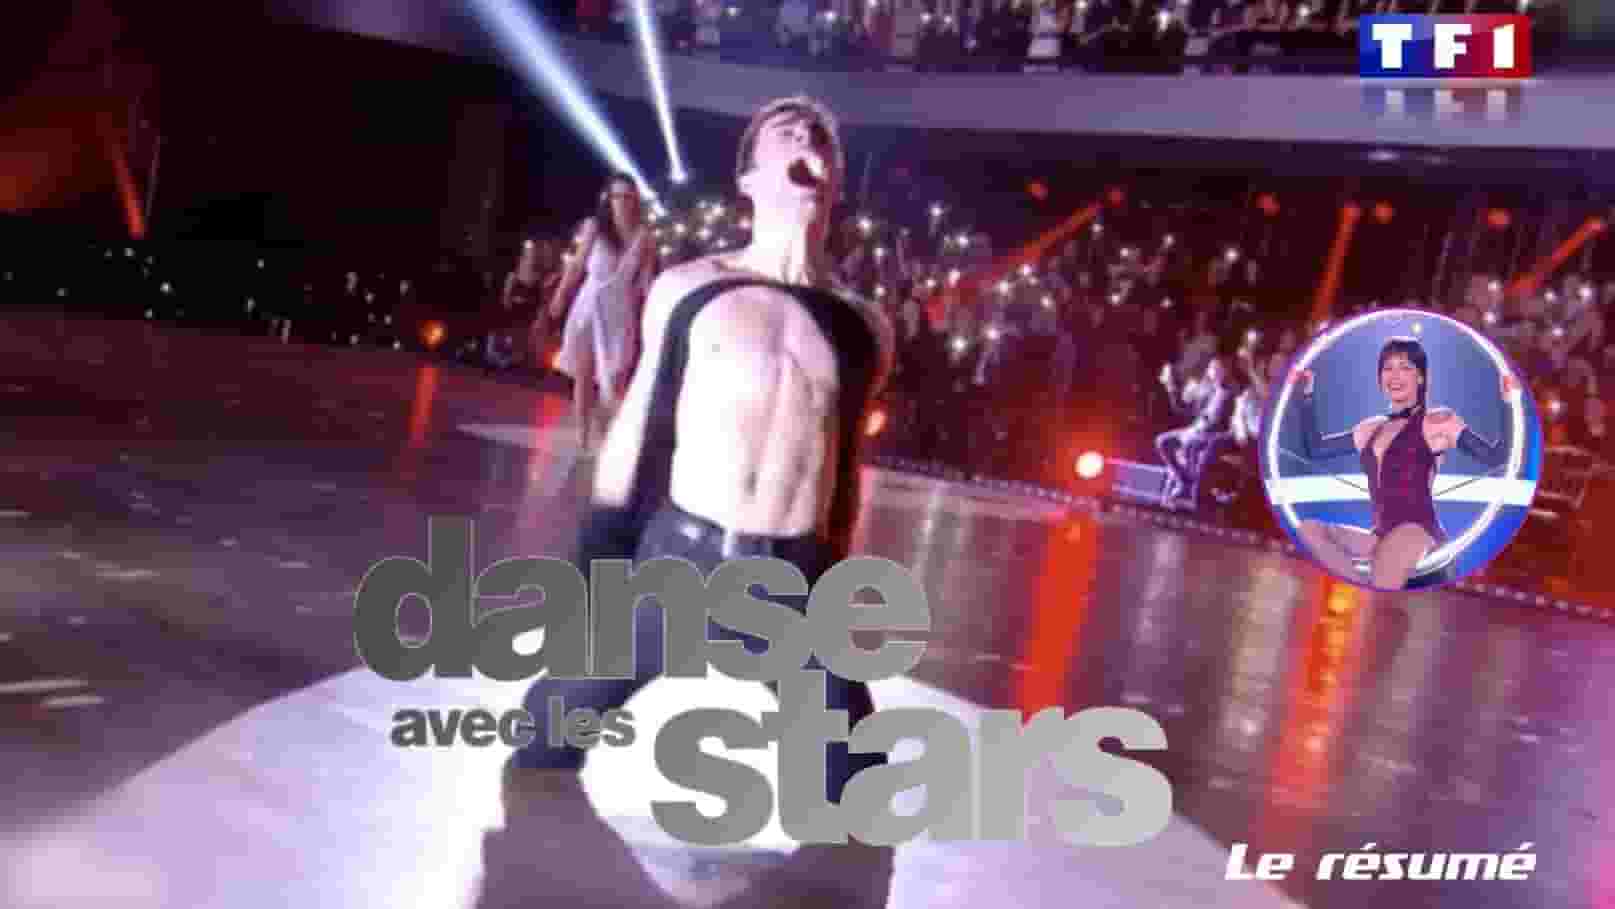 Danse Avec Les Stars 9: le Prime n°4 - ©/-\ll in One TV, All rights reserved. Do not copy. Reproduction Interdite